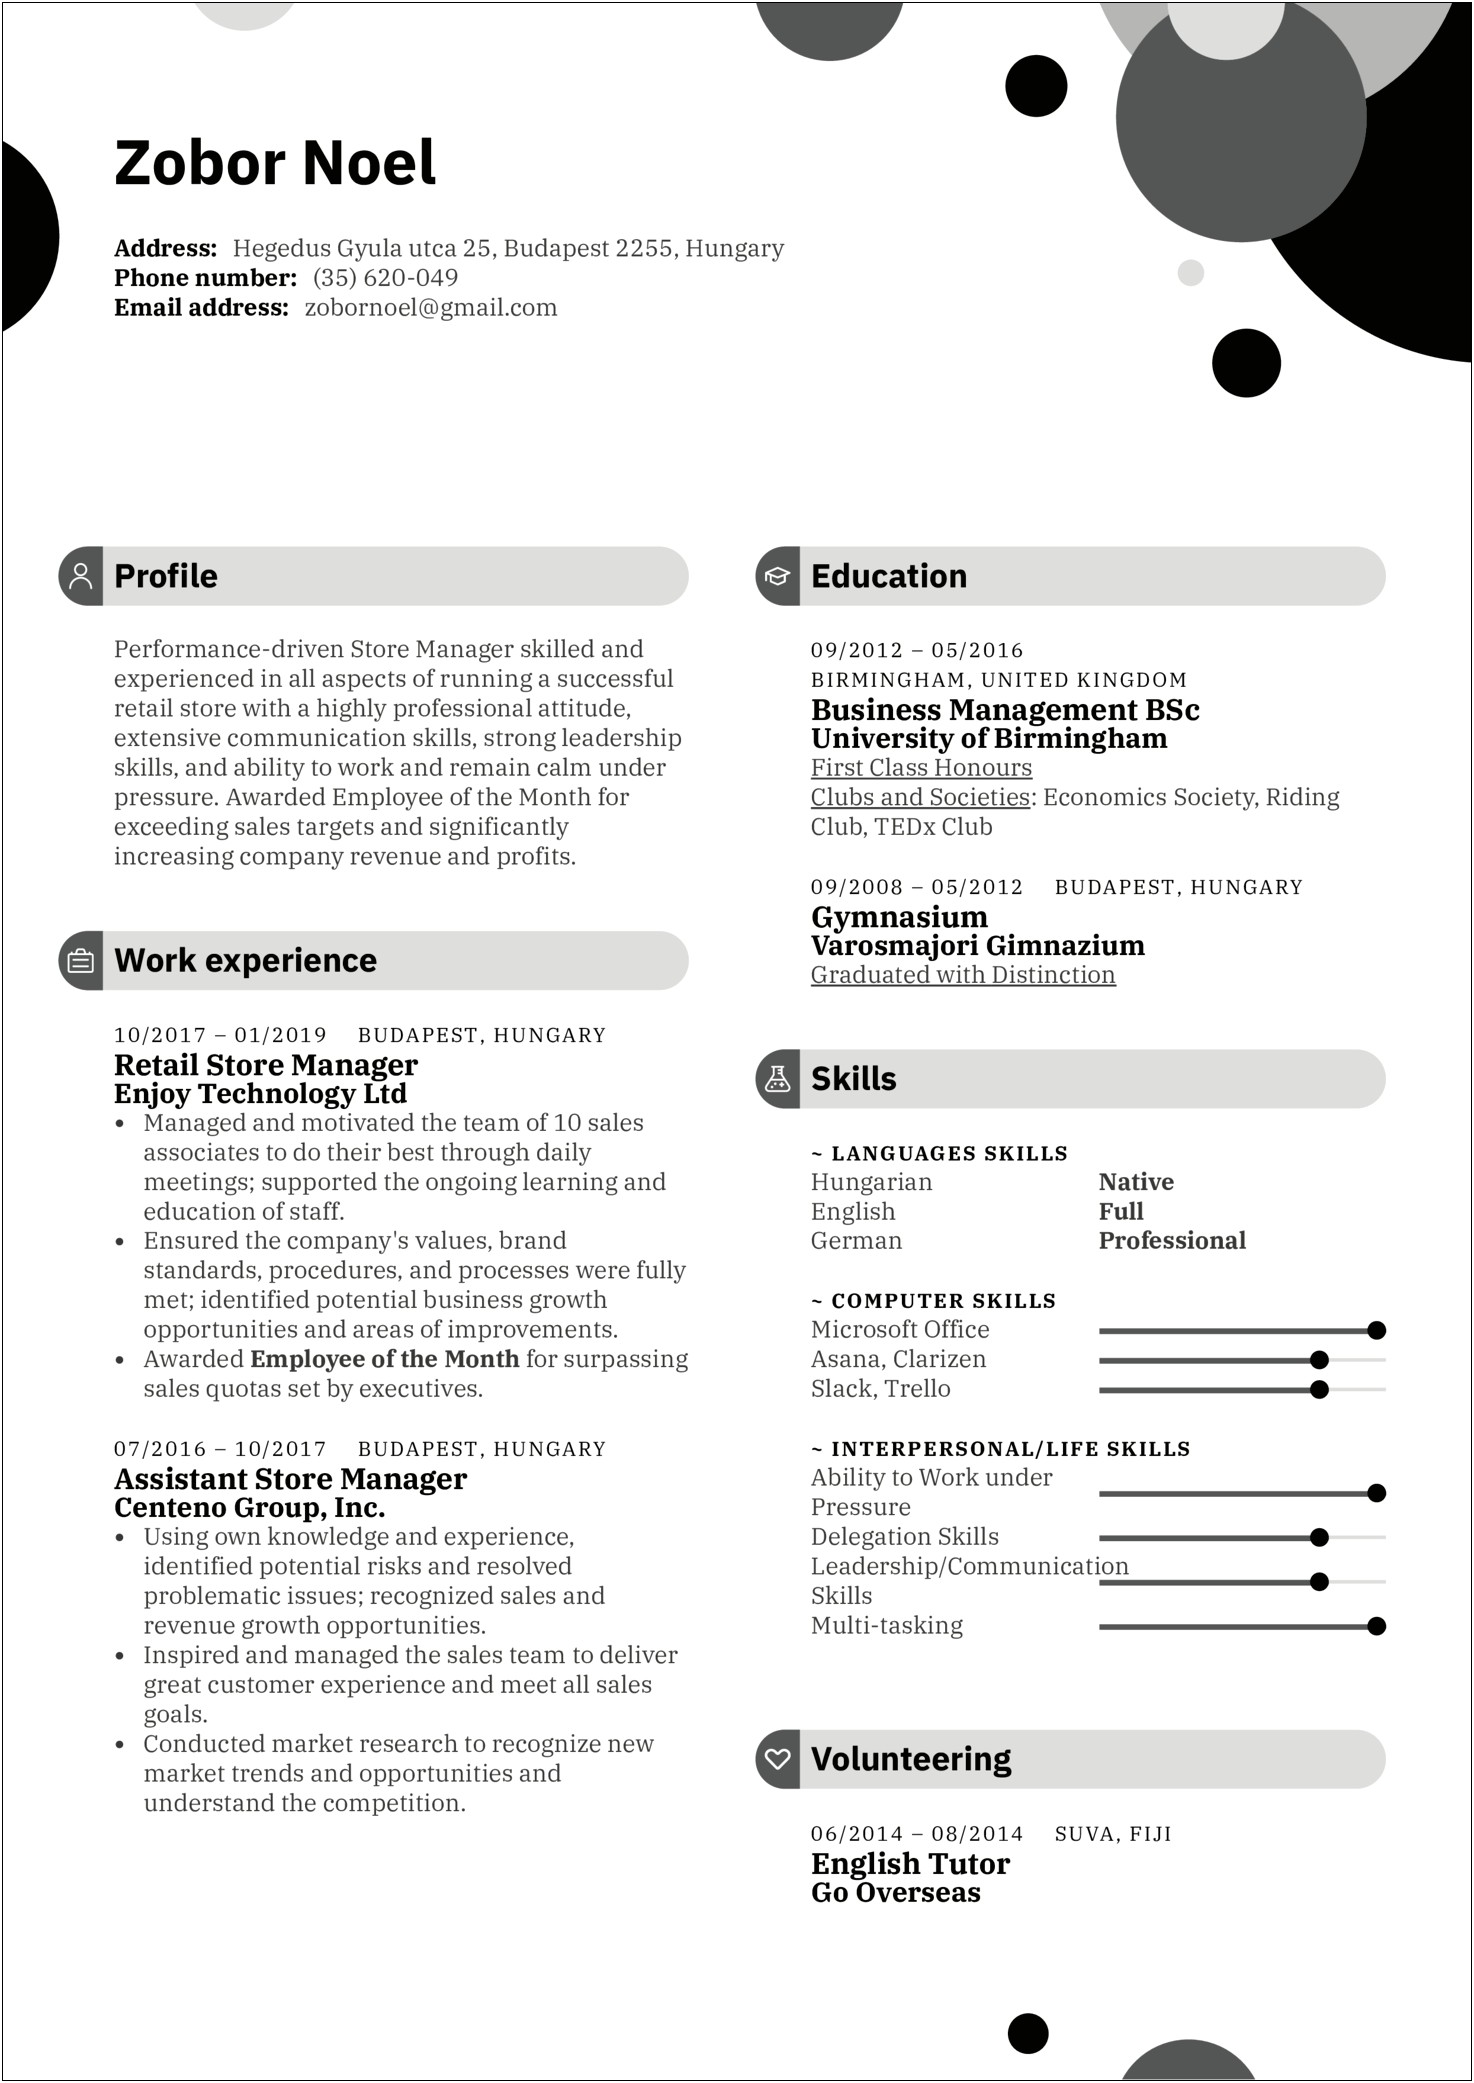 Resume Example For Retail Manager